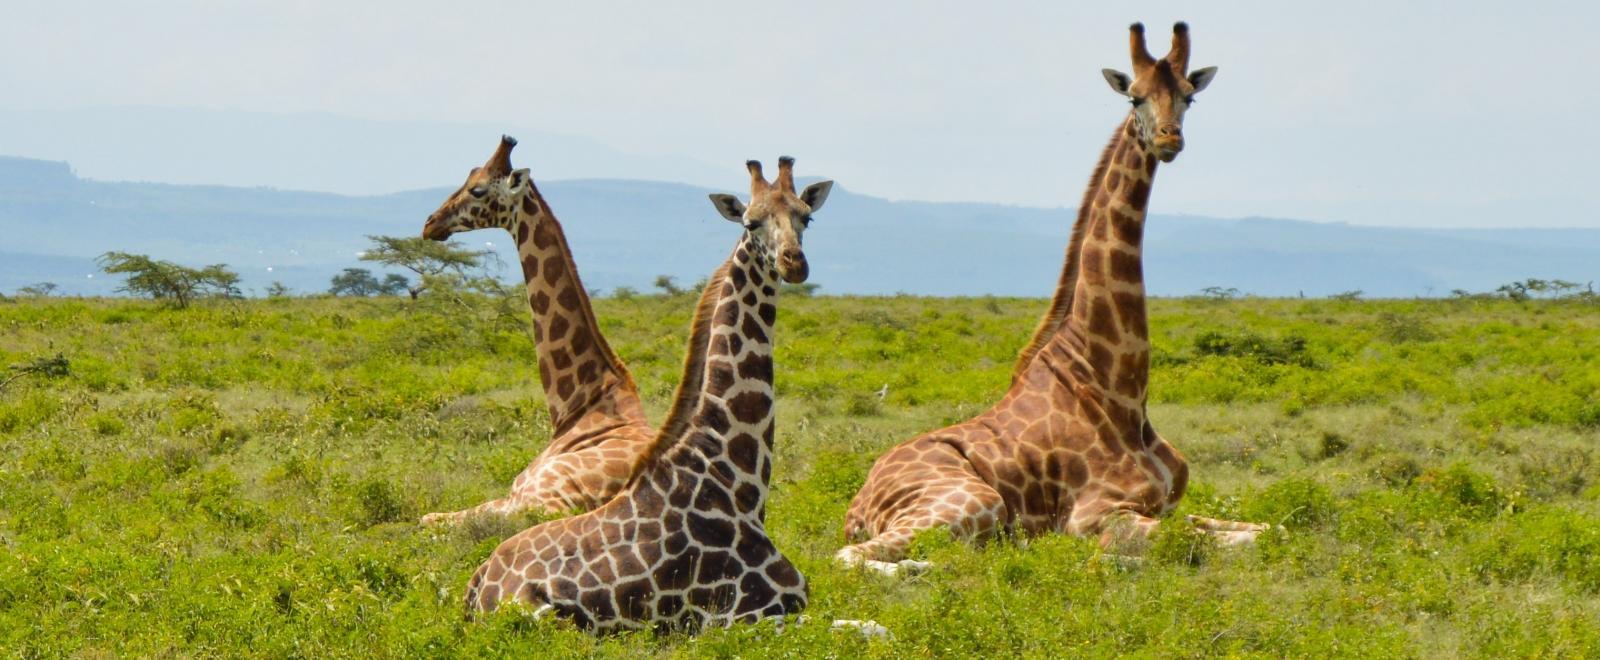 A group of giraffes seen sitting together near our Projects Abroad volunteer opportunities in Kenya.